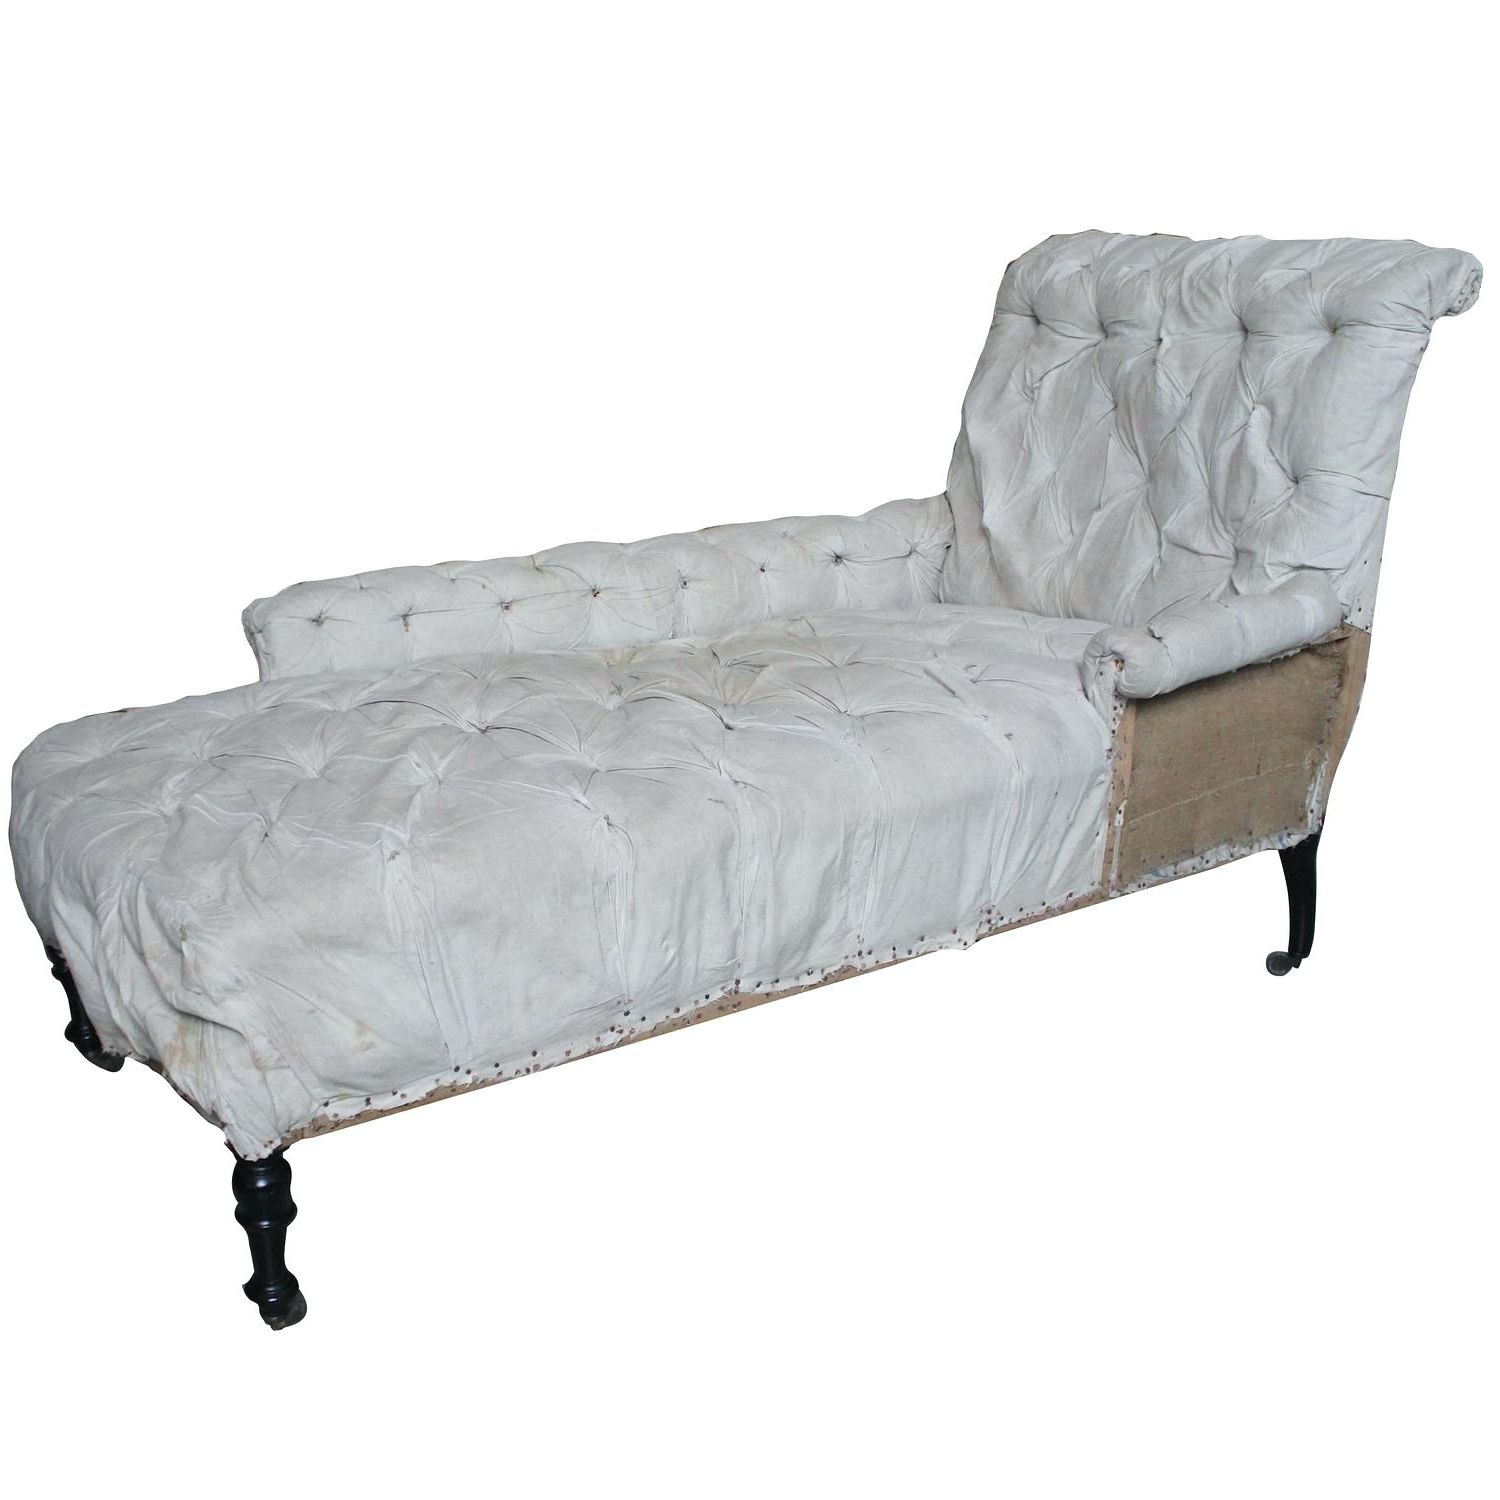 Best And Newest Alessia Chaise Lounge Chair Tufted Amazing Of Tufted Chaise Lounge With Regard To Alessia Chaise Lounge Tufted Chairs (View 14 of 15)